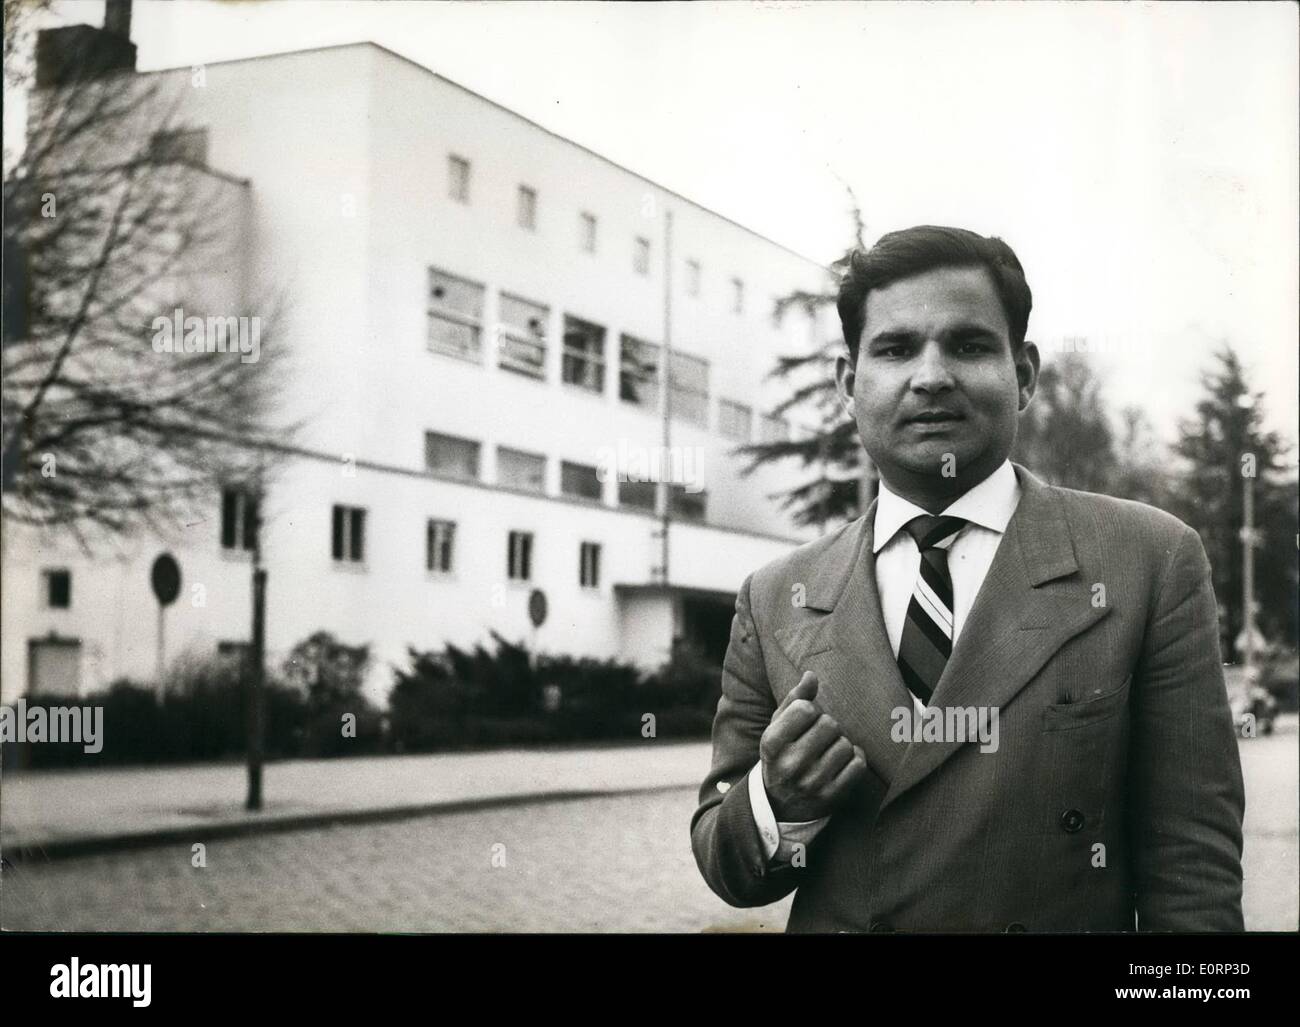 Apr. 04, 1960 - Zutshi visiting parliament in Bonn: 32-year-old Indian chemical student Zutshi (Zutshi) is at the moment staying in Bonn. He had been arrested on March 26th in East-Berlin because he wanted to demonstrate for freedom in East- Germany, but he was set free again a few days later. Zutshi came to Bonn to fetch his passport. Photo shows the Indian Zutshi visiting the Bunderhaus (houses of parliament) in Bonn. Stock Photo